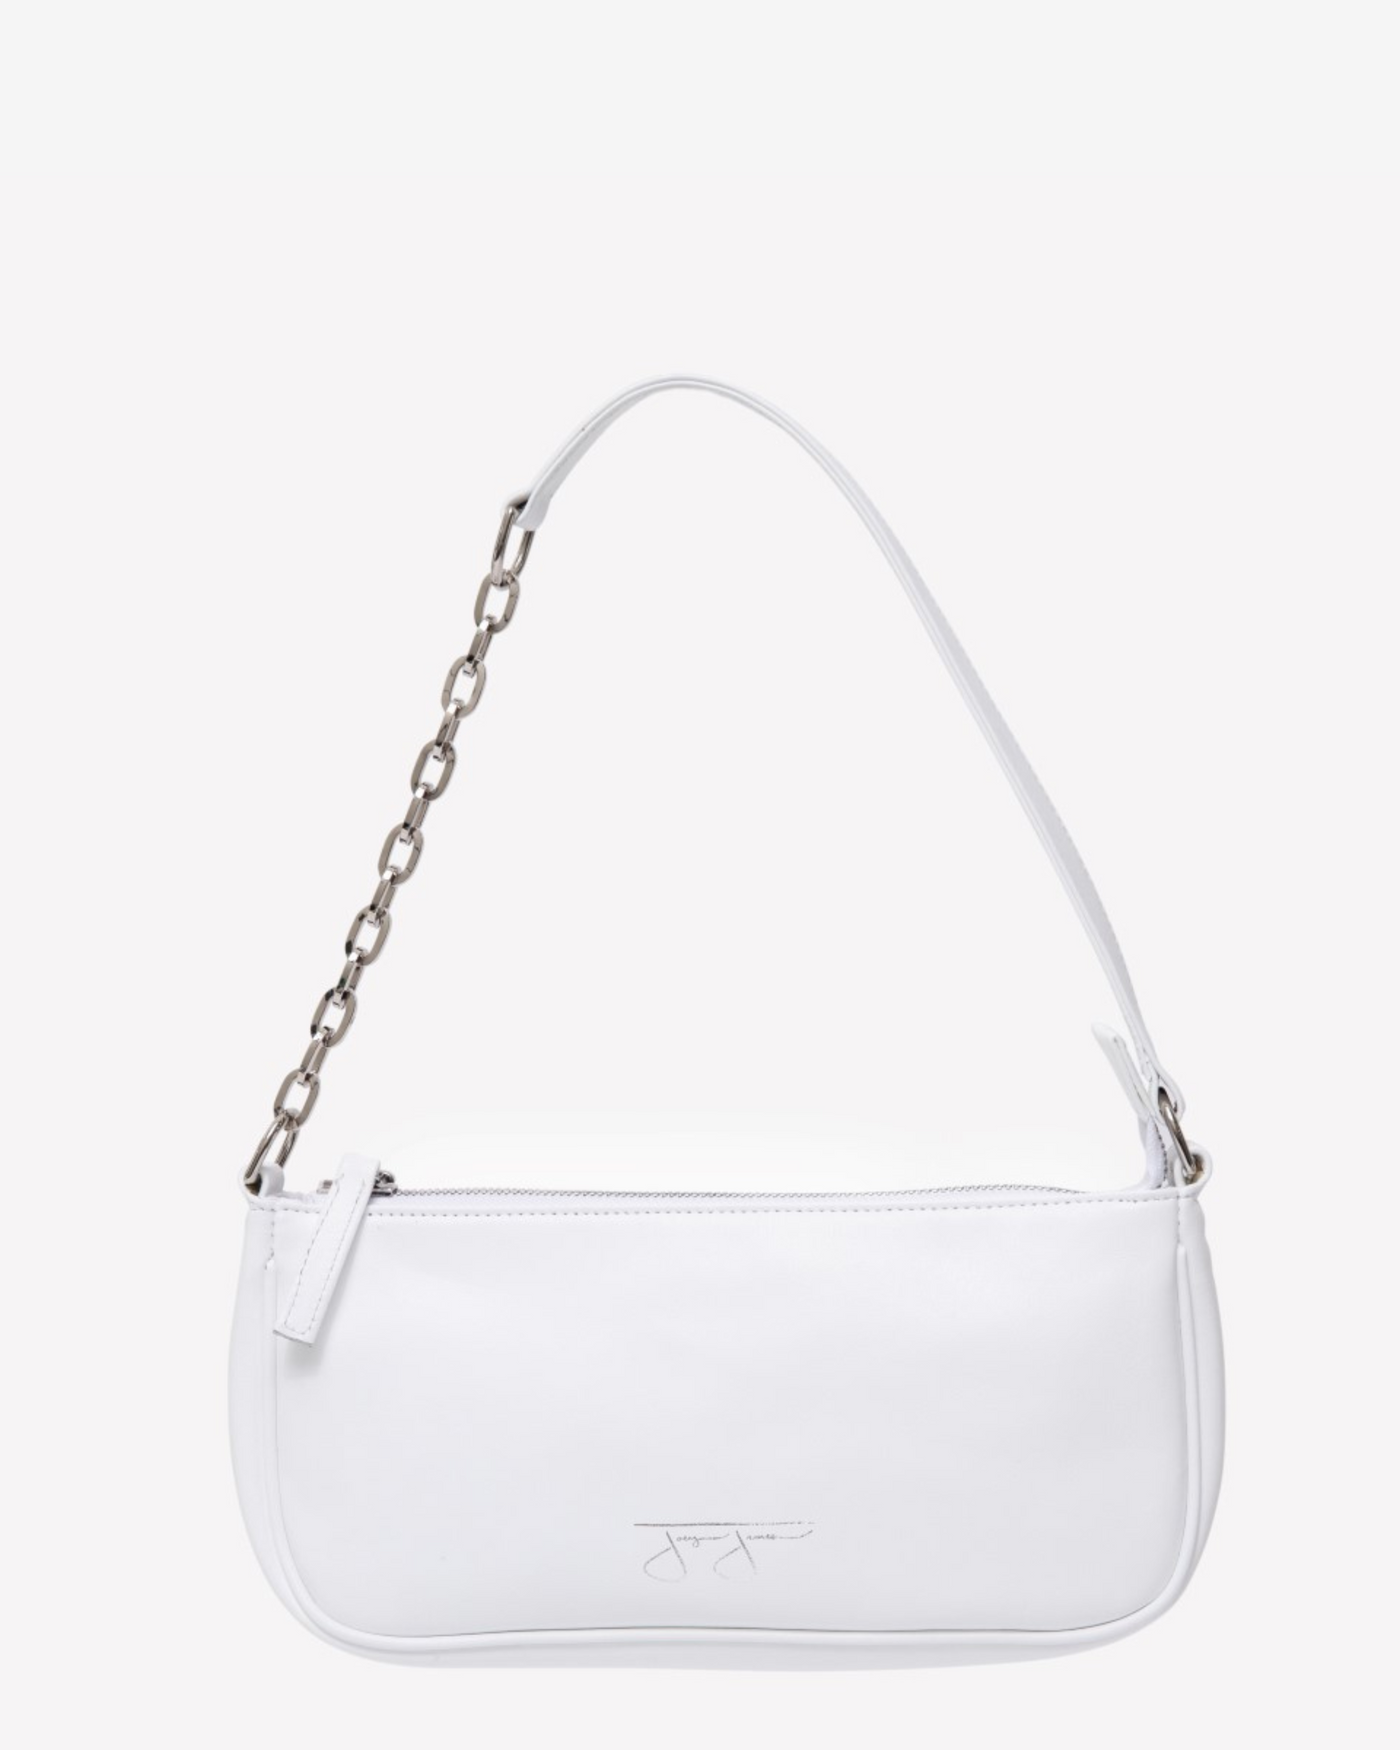 Lucy Bag - White  Joey James, The Label   